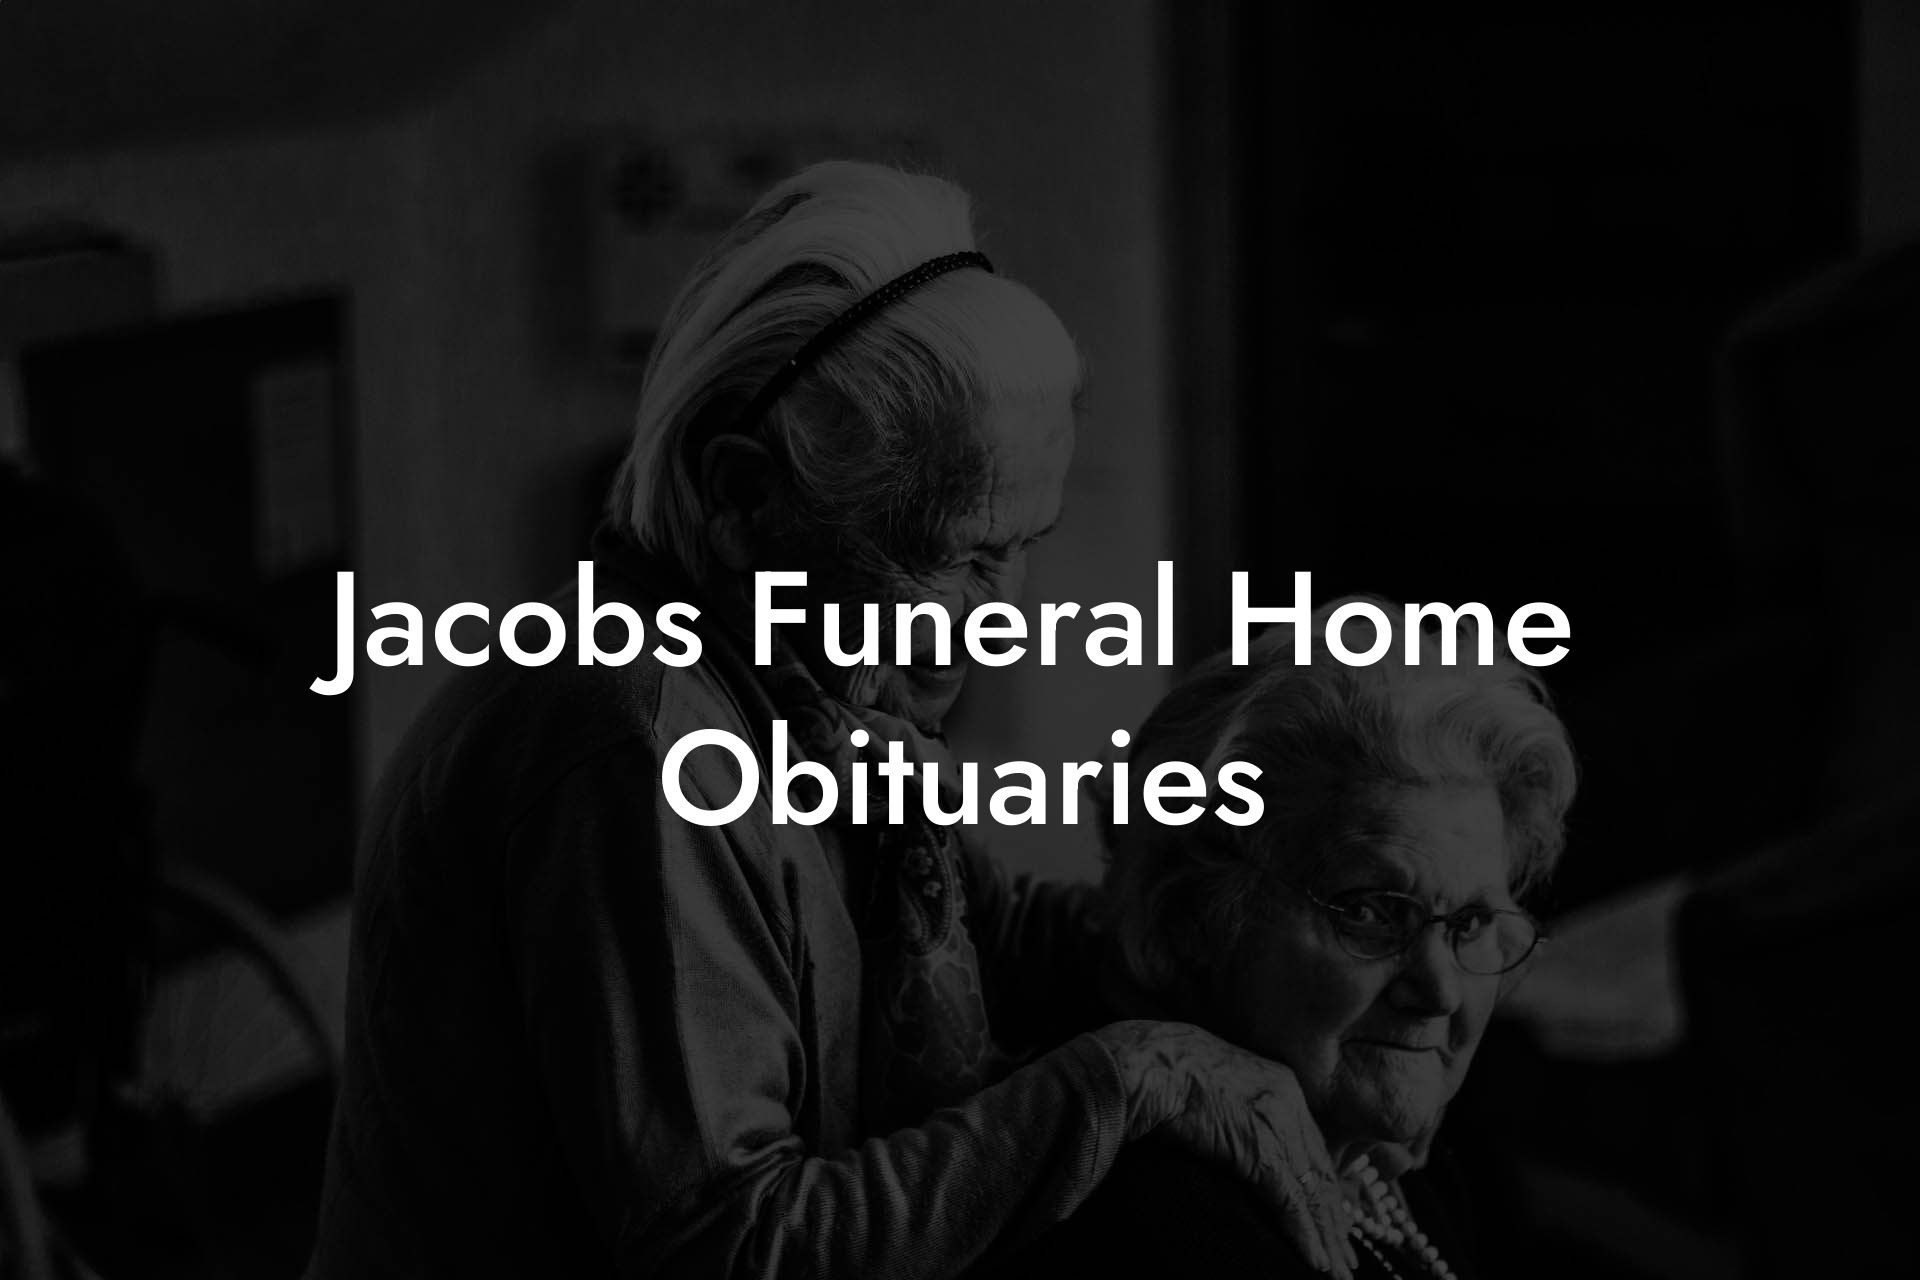 Jacobs Funeral Home Obituaries